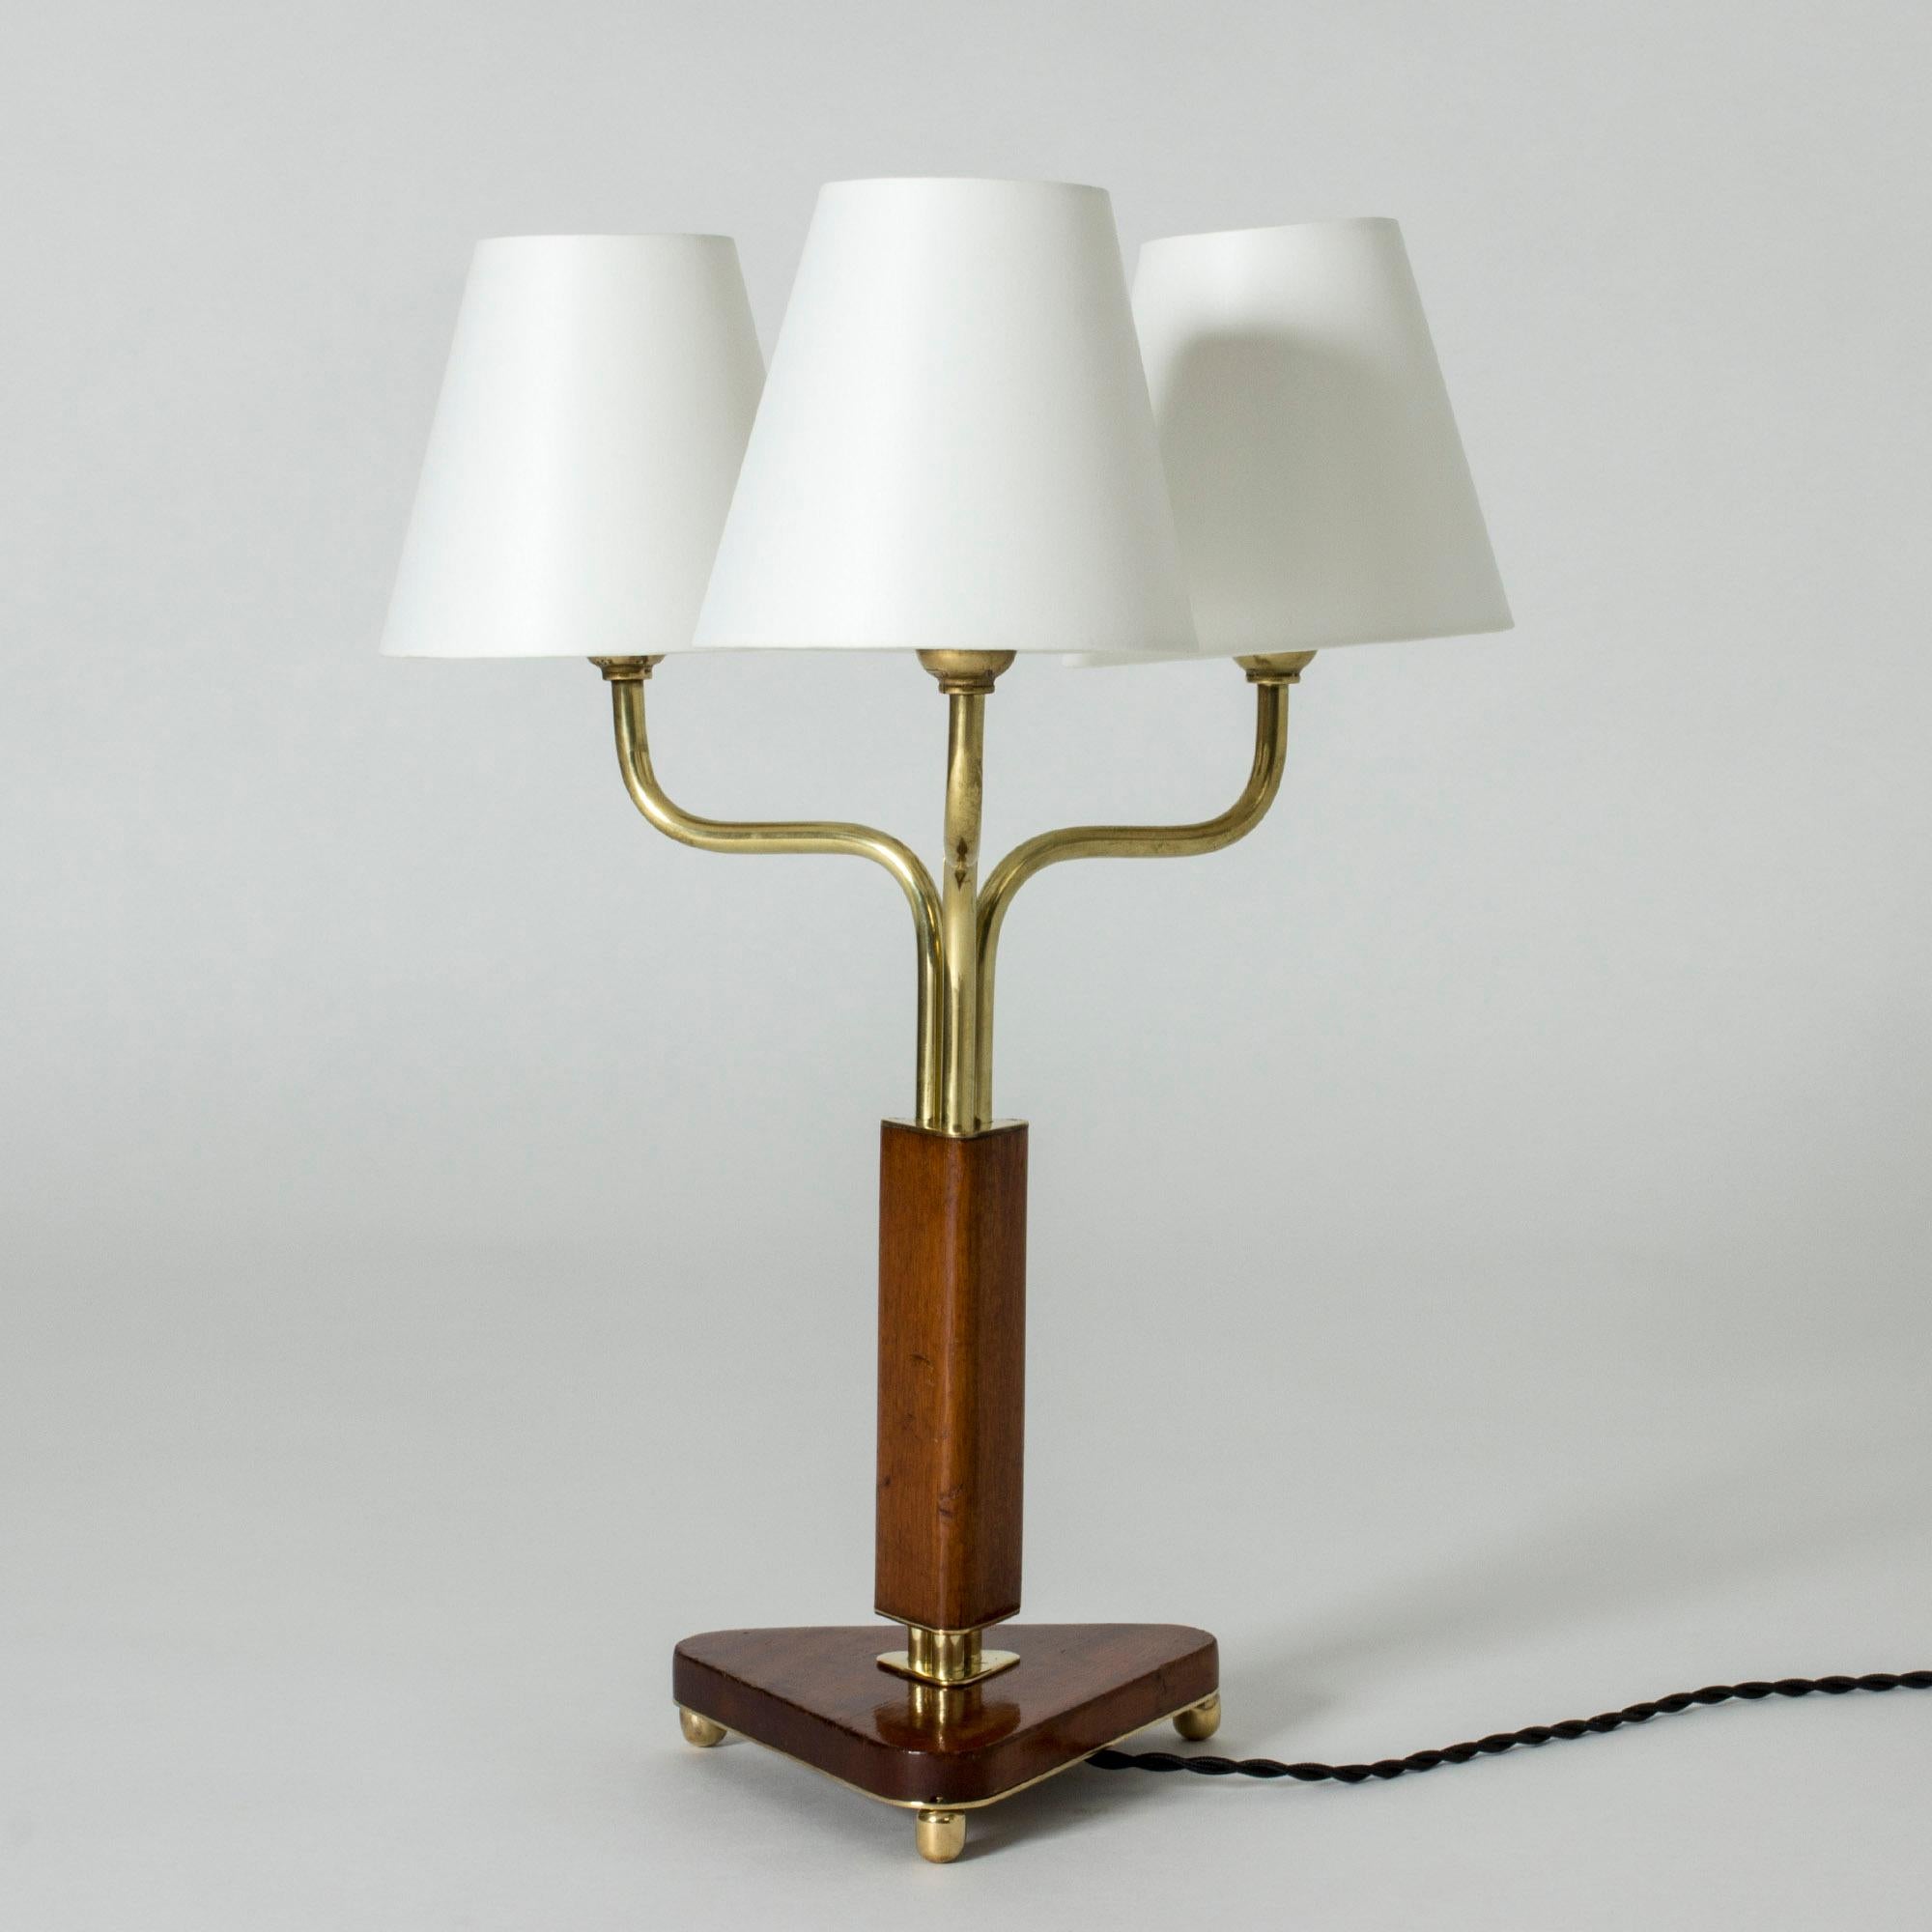 Mahogany and brass table lamp, made in Sweden in the 1940s. Three shades on arched arms. Beautiful mahogany stem and triangular base with brass ball feet.